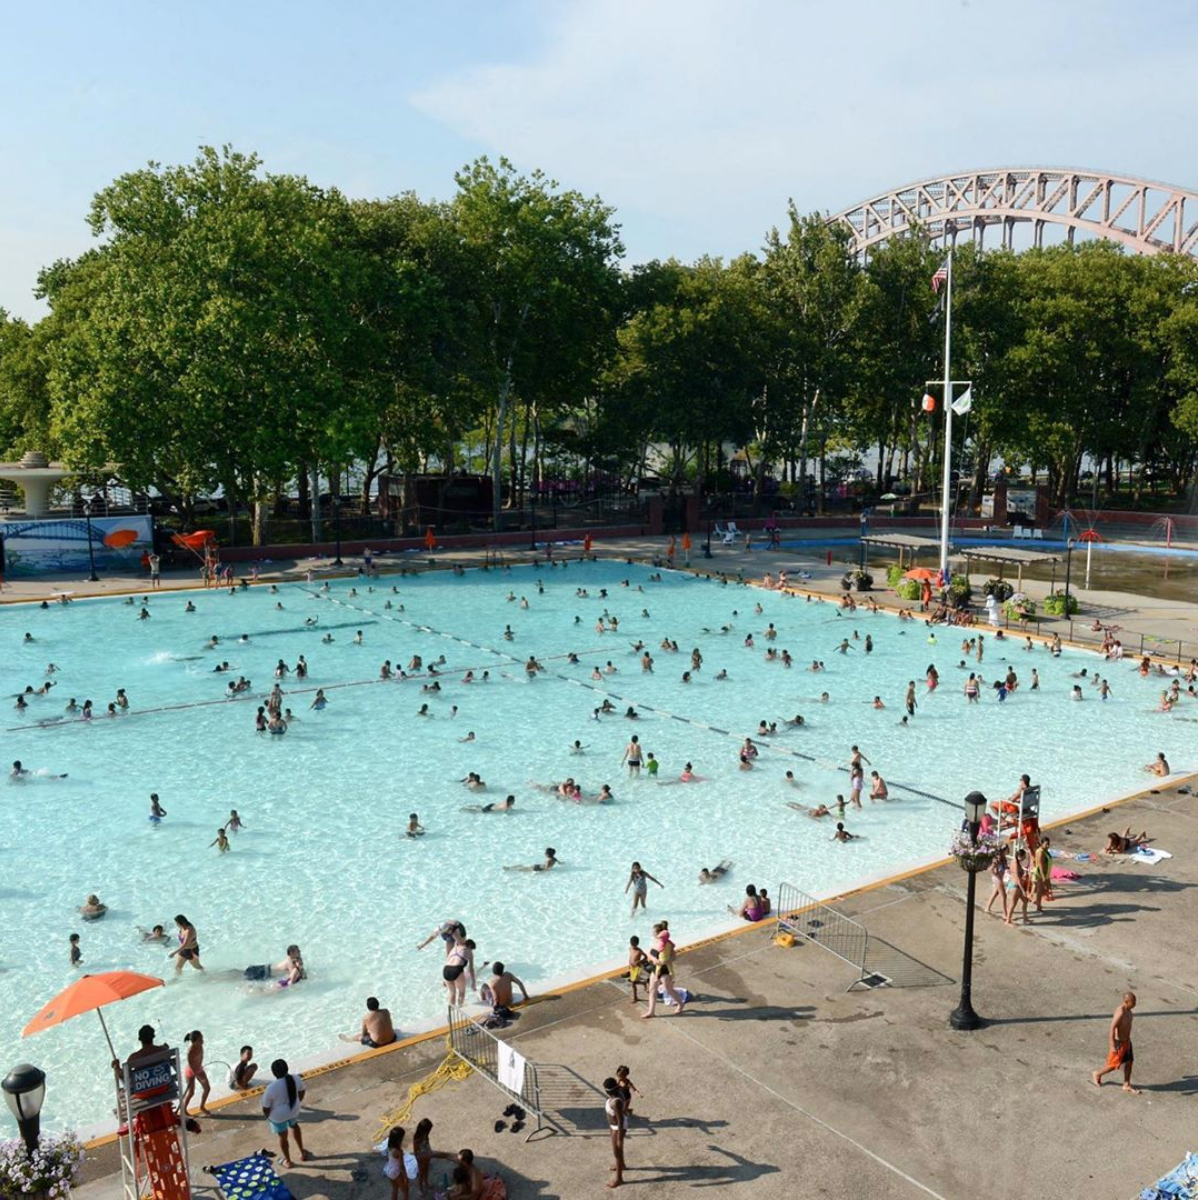 Astoria Pool To Open August 1st!